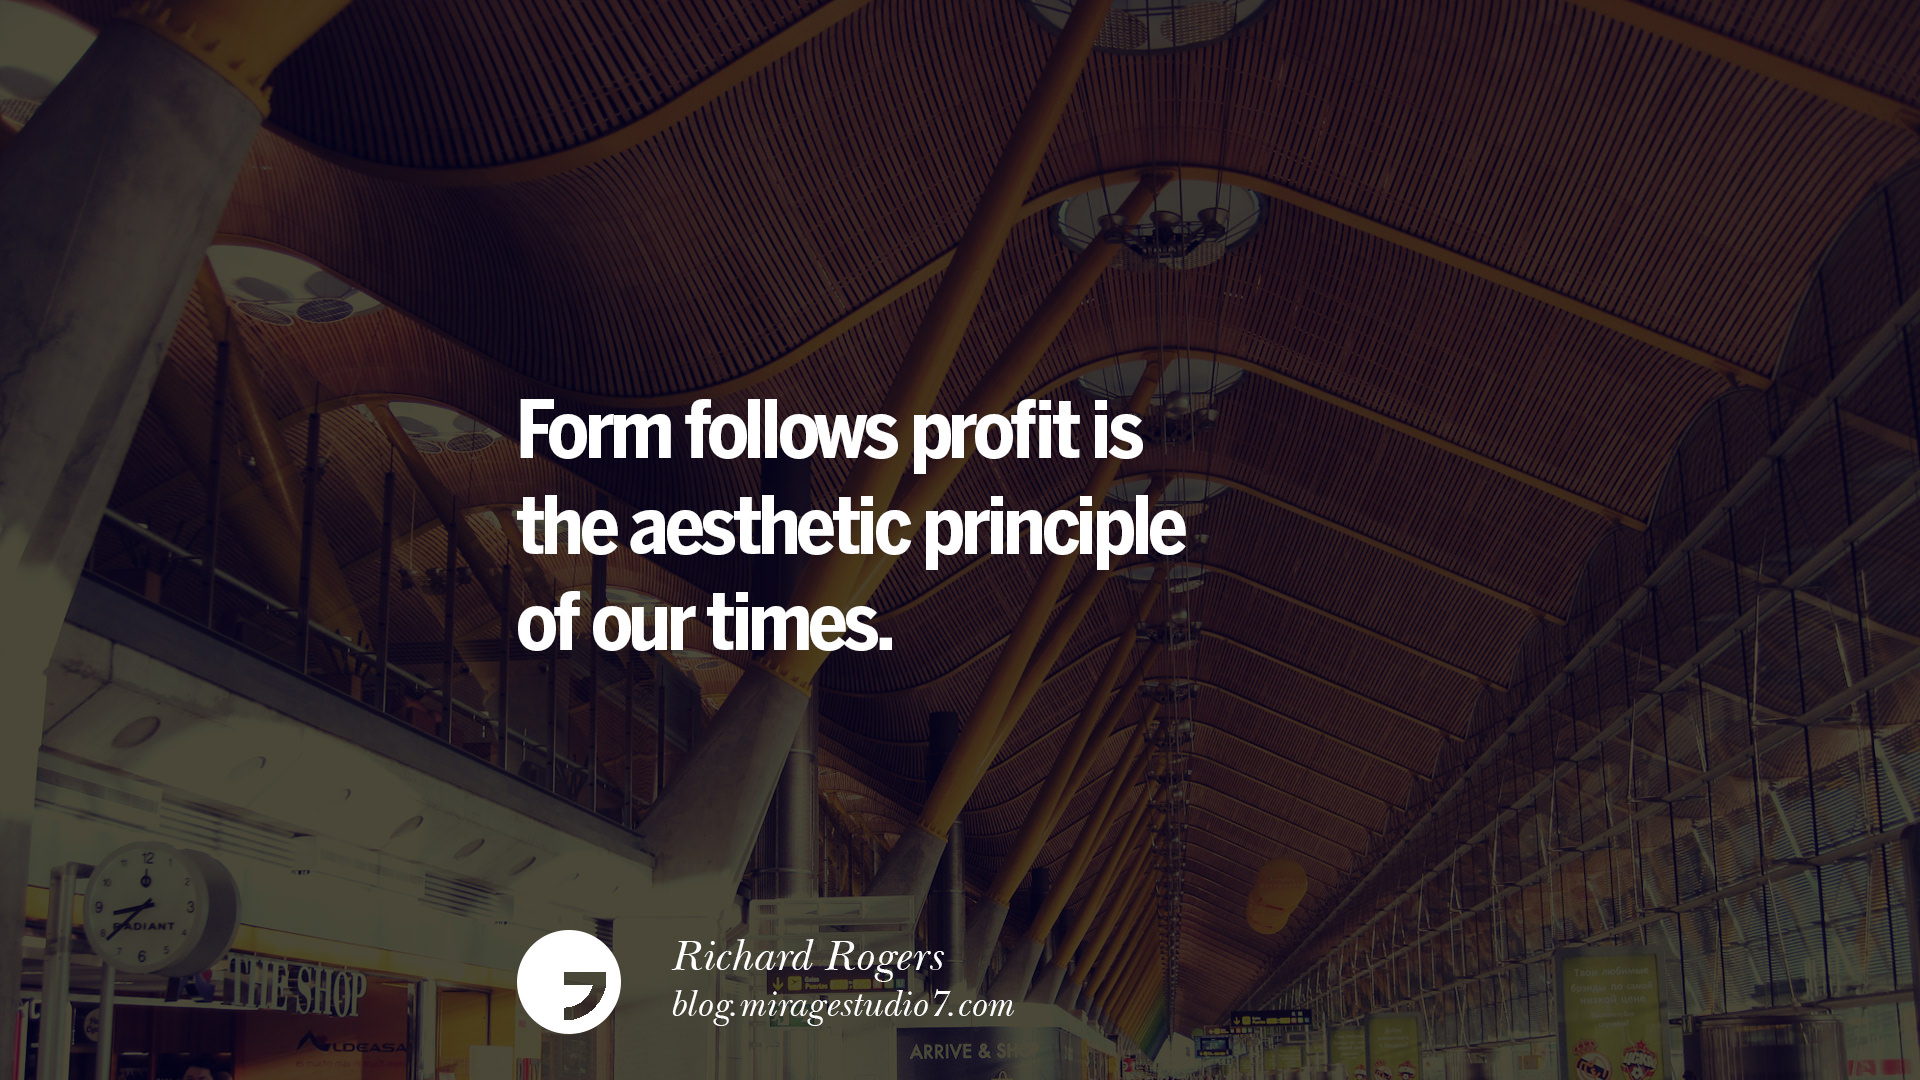 28 Inspirational Architecture Quotes by Famous Architects and Interior ...